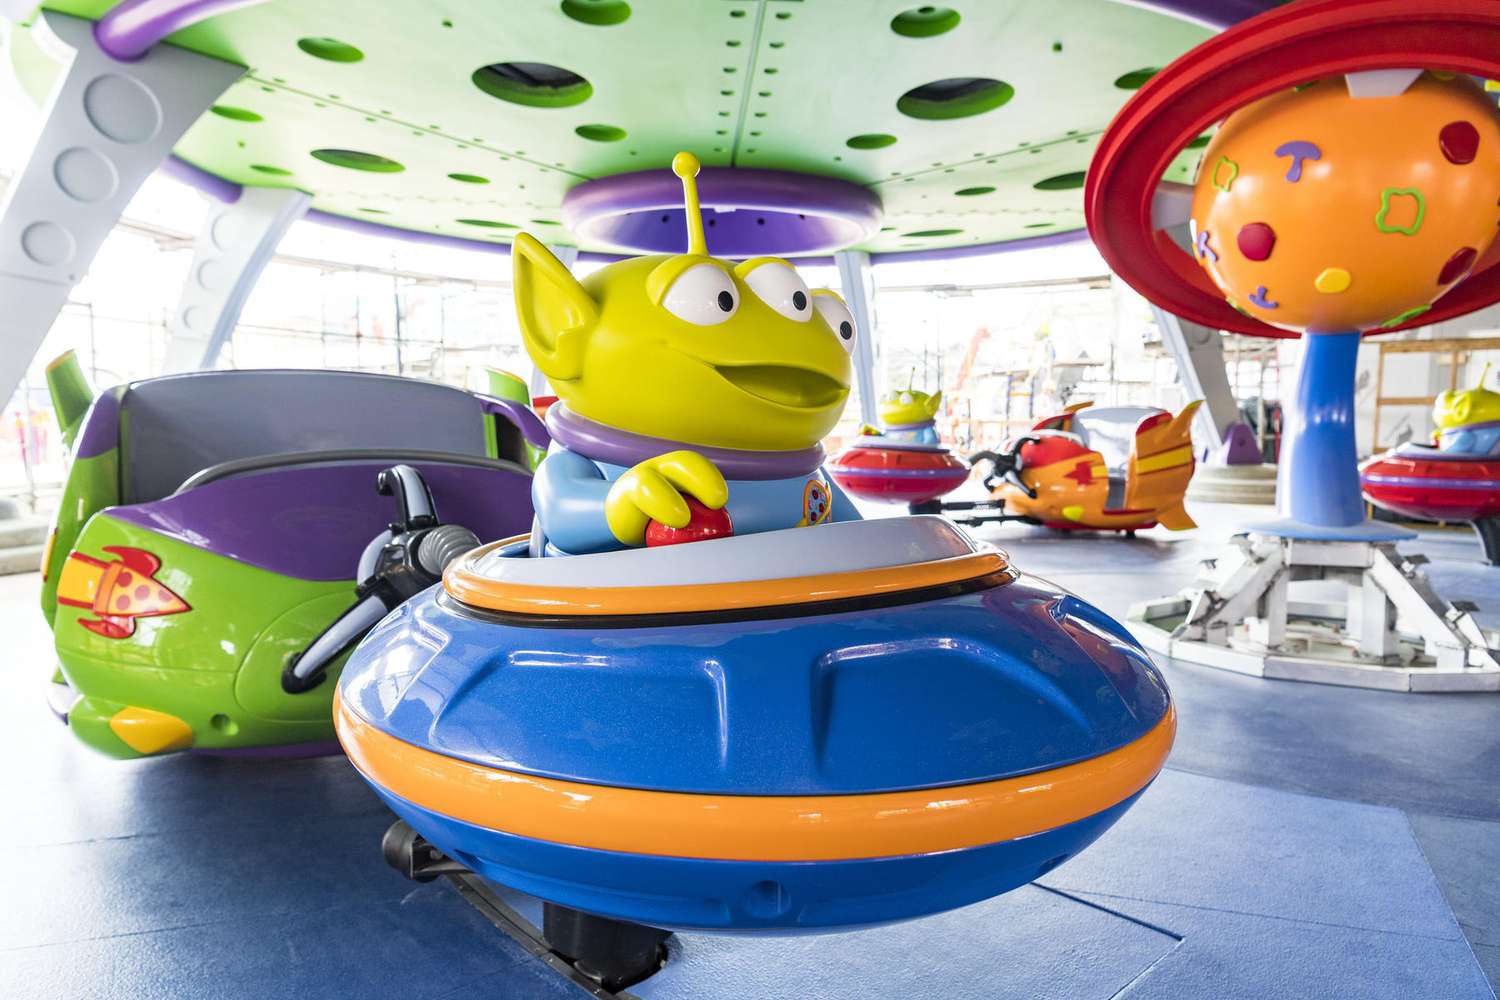 Alien Swirling Saucers Ride at Toy Story Land